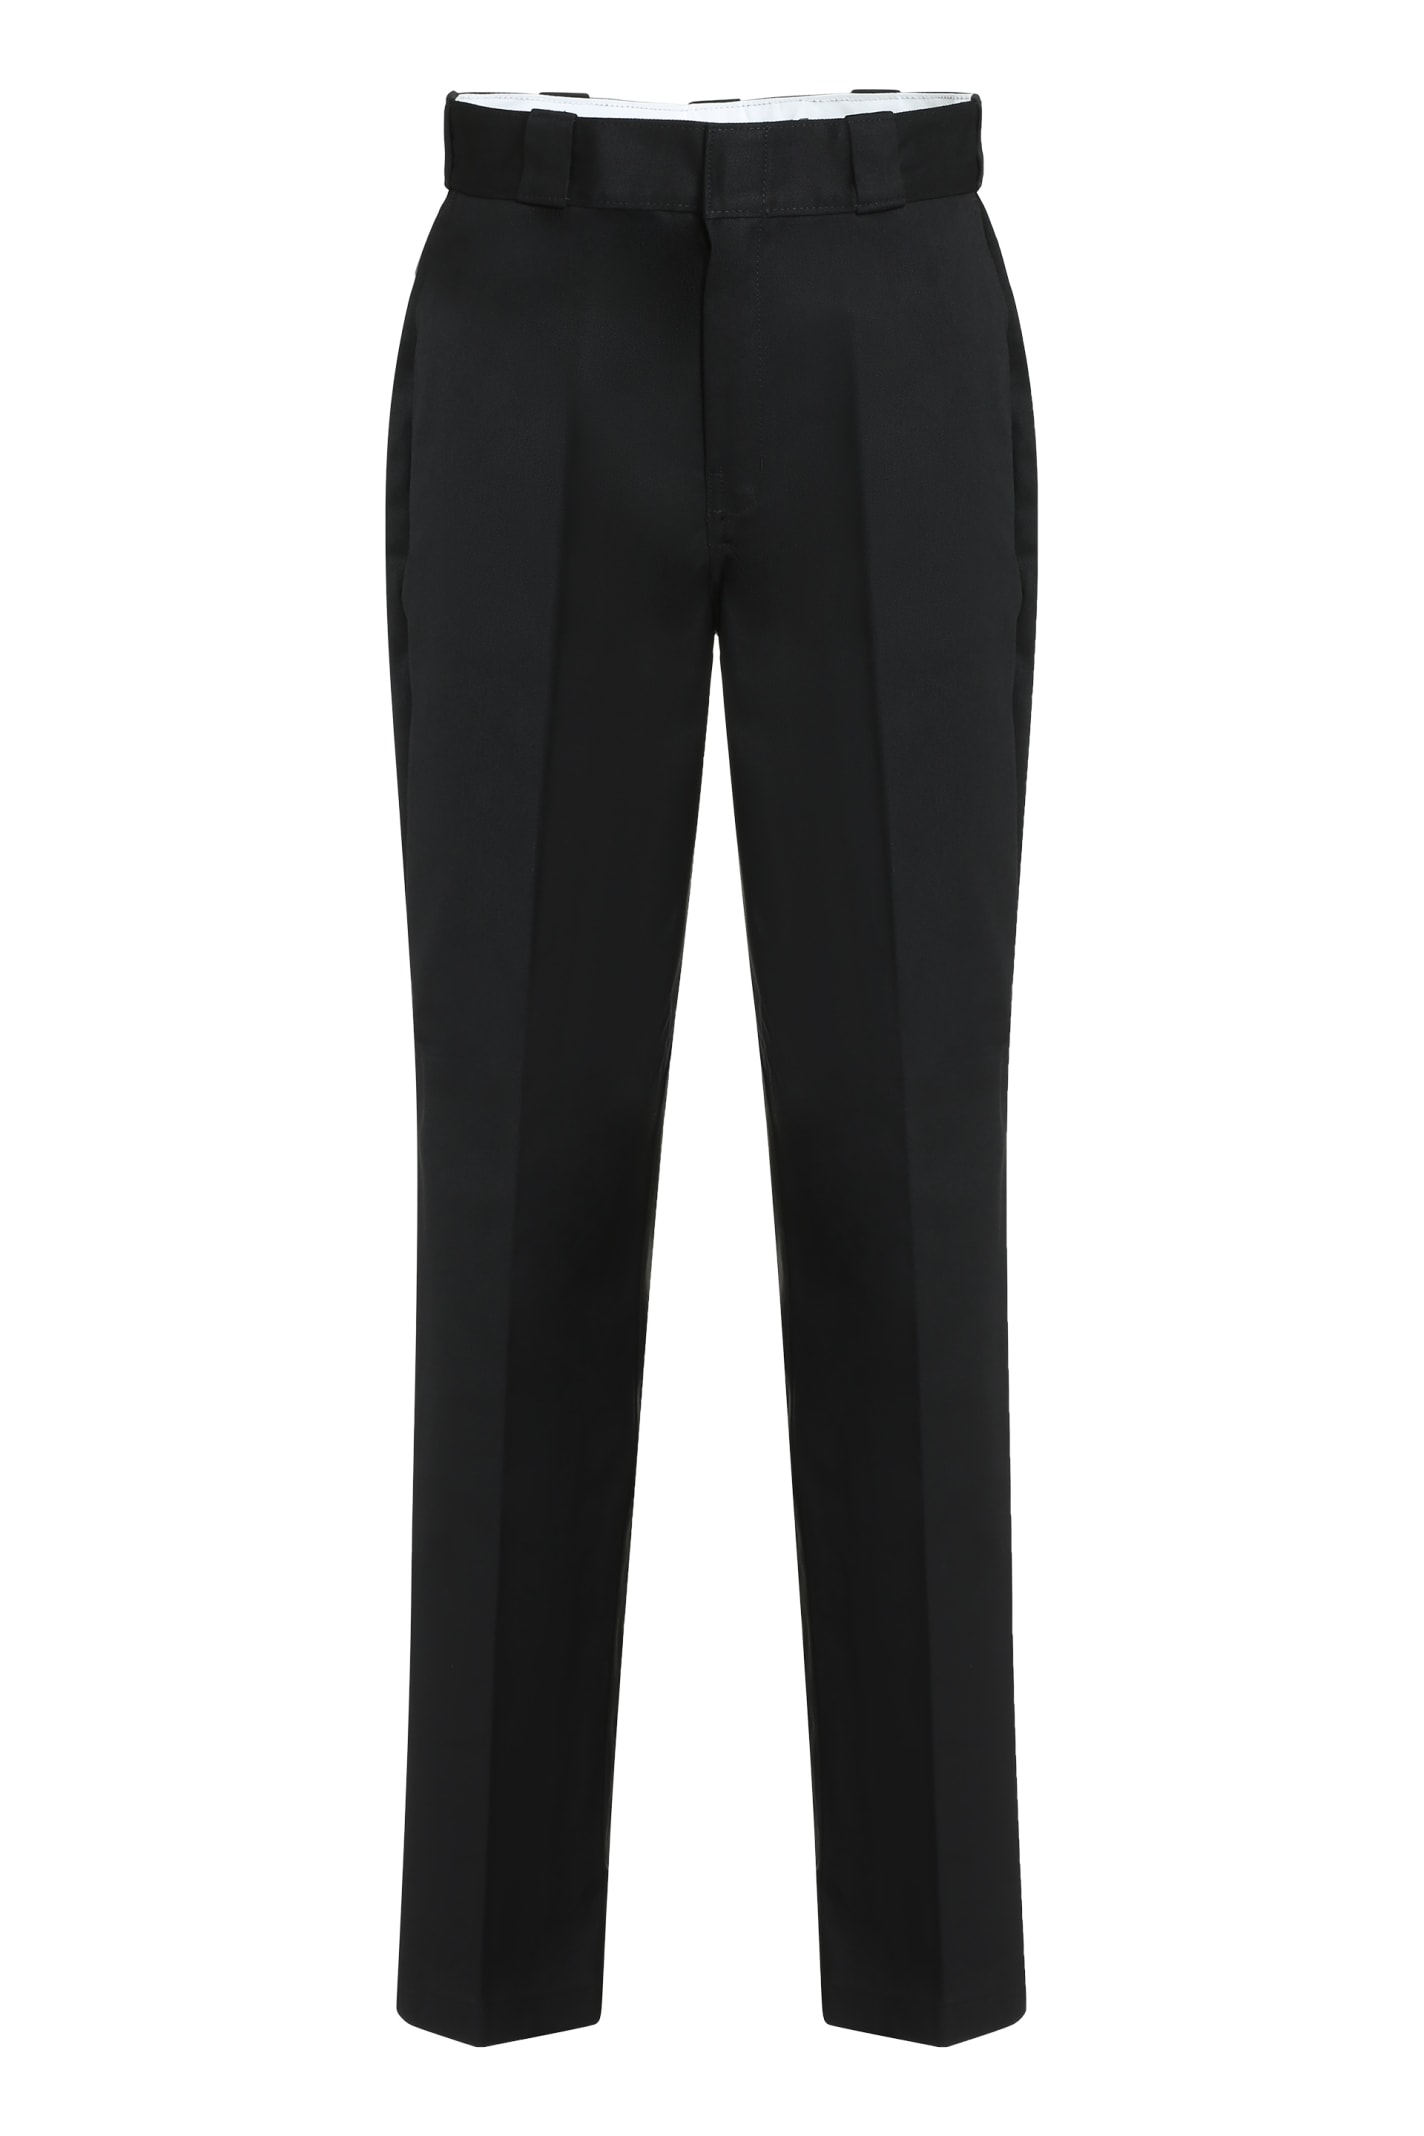 Shop Dickies 874 Cotton Blend Trousers In Black